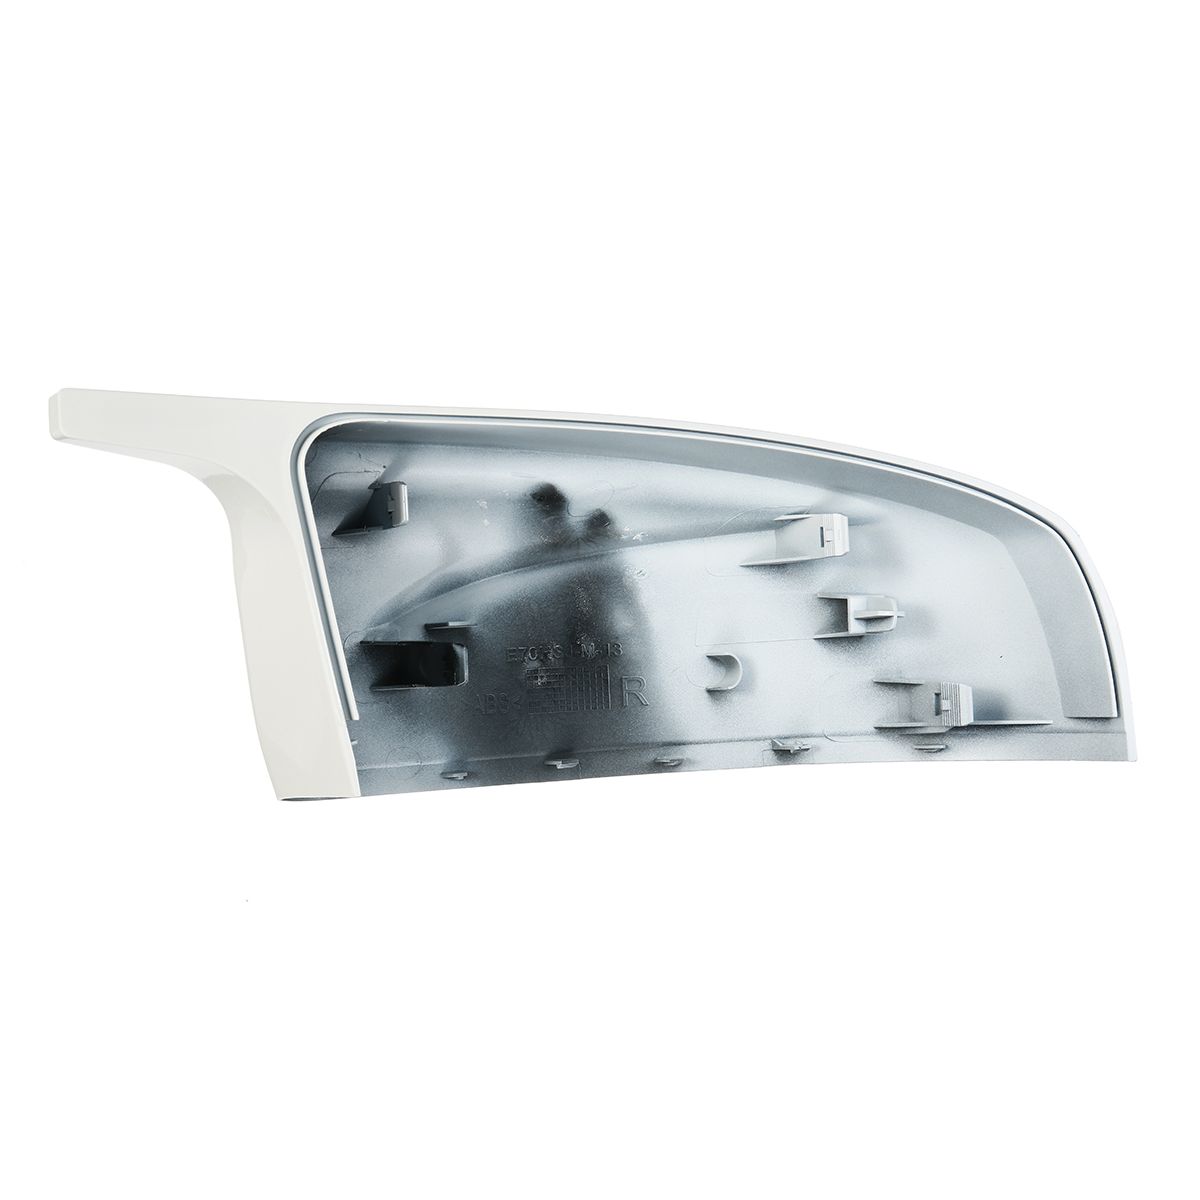 1-Pair-Glossy-White-Rear-View-Mirror-Cap-Cover-Replacement-Left--Right-For-BMW-X5-X6-E70-E71-2007-20-1754884